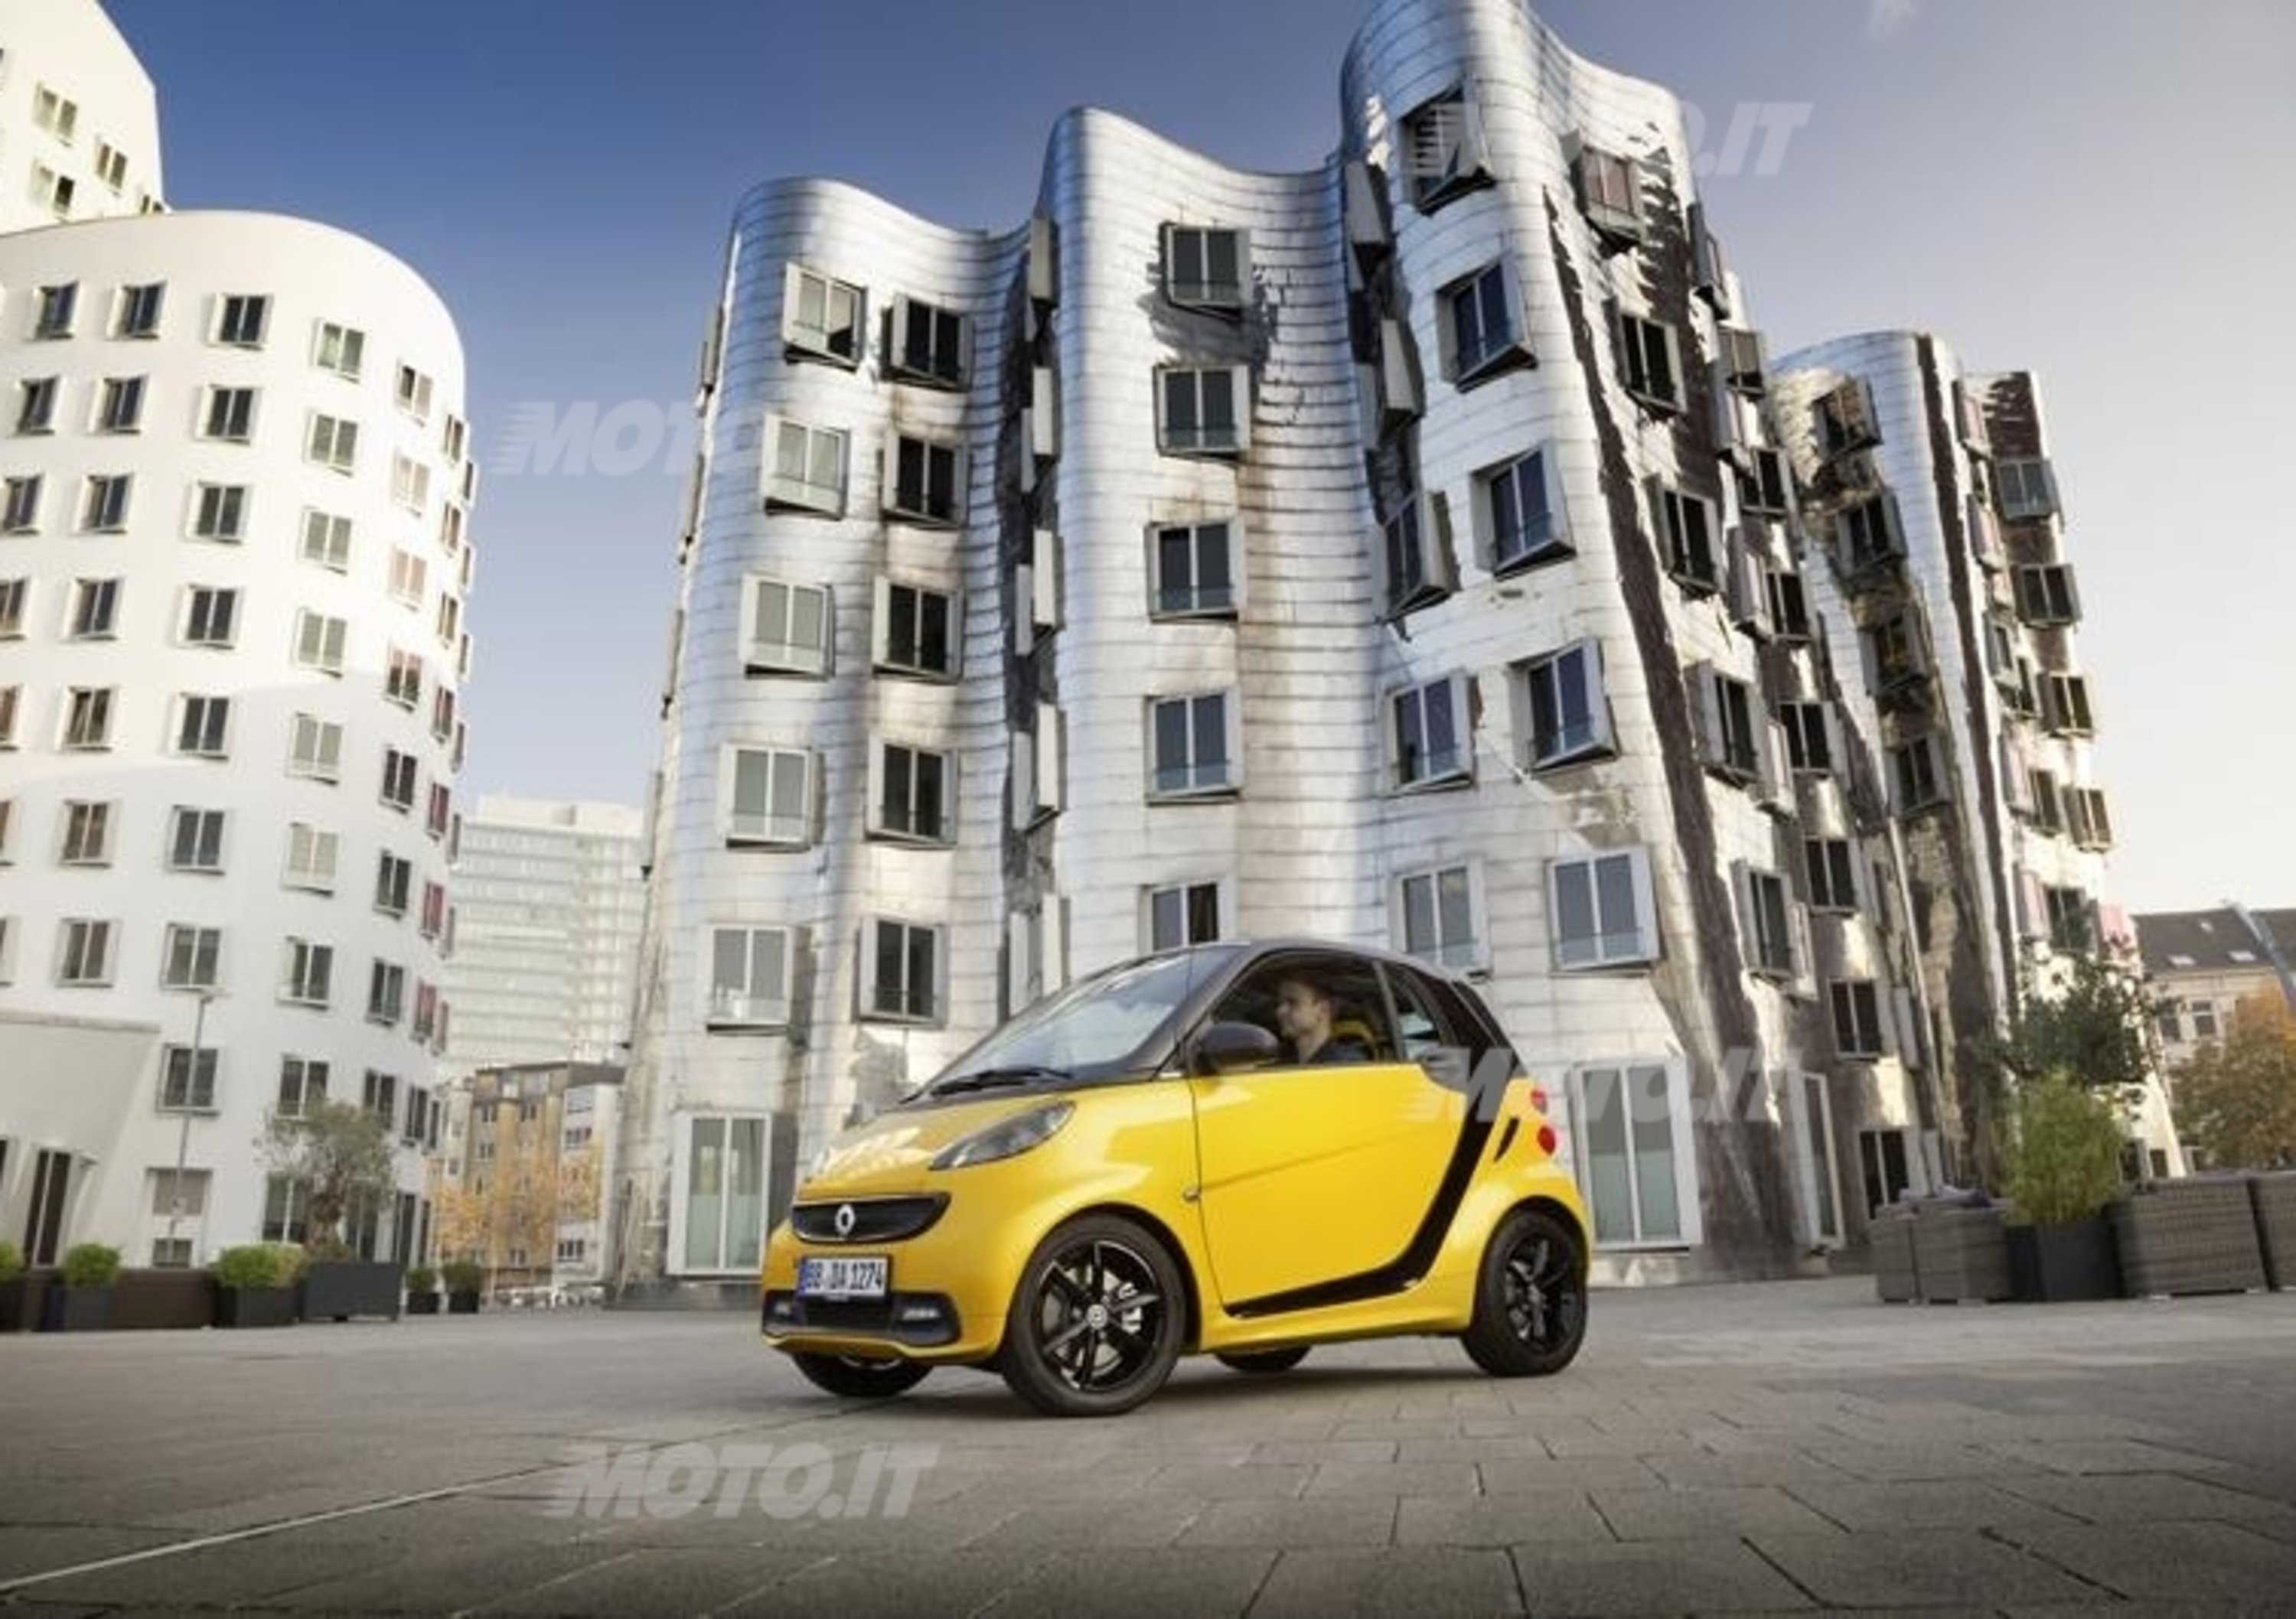 smart fortwo cityflame edition